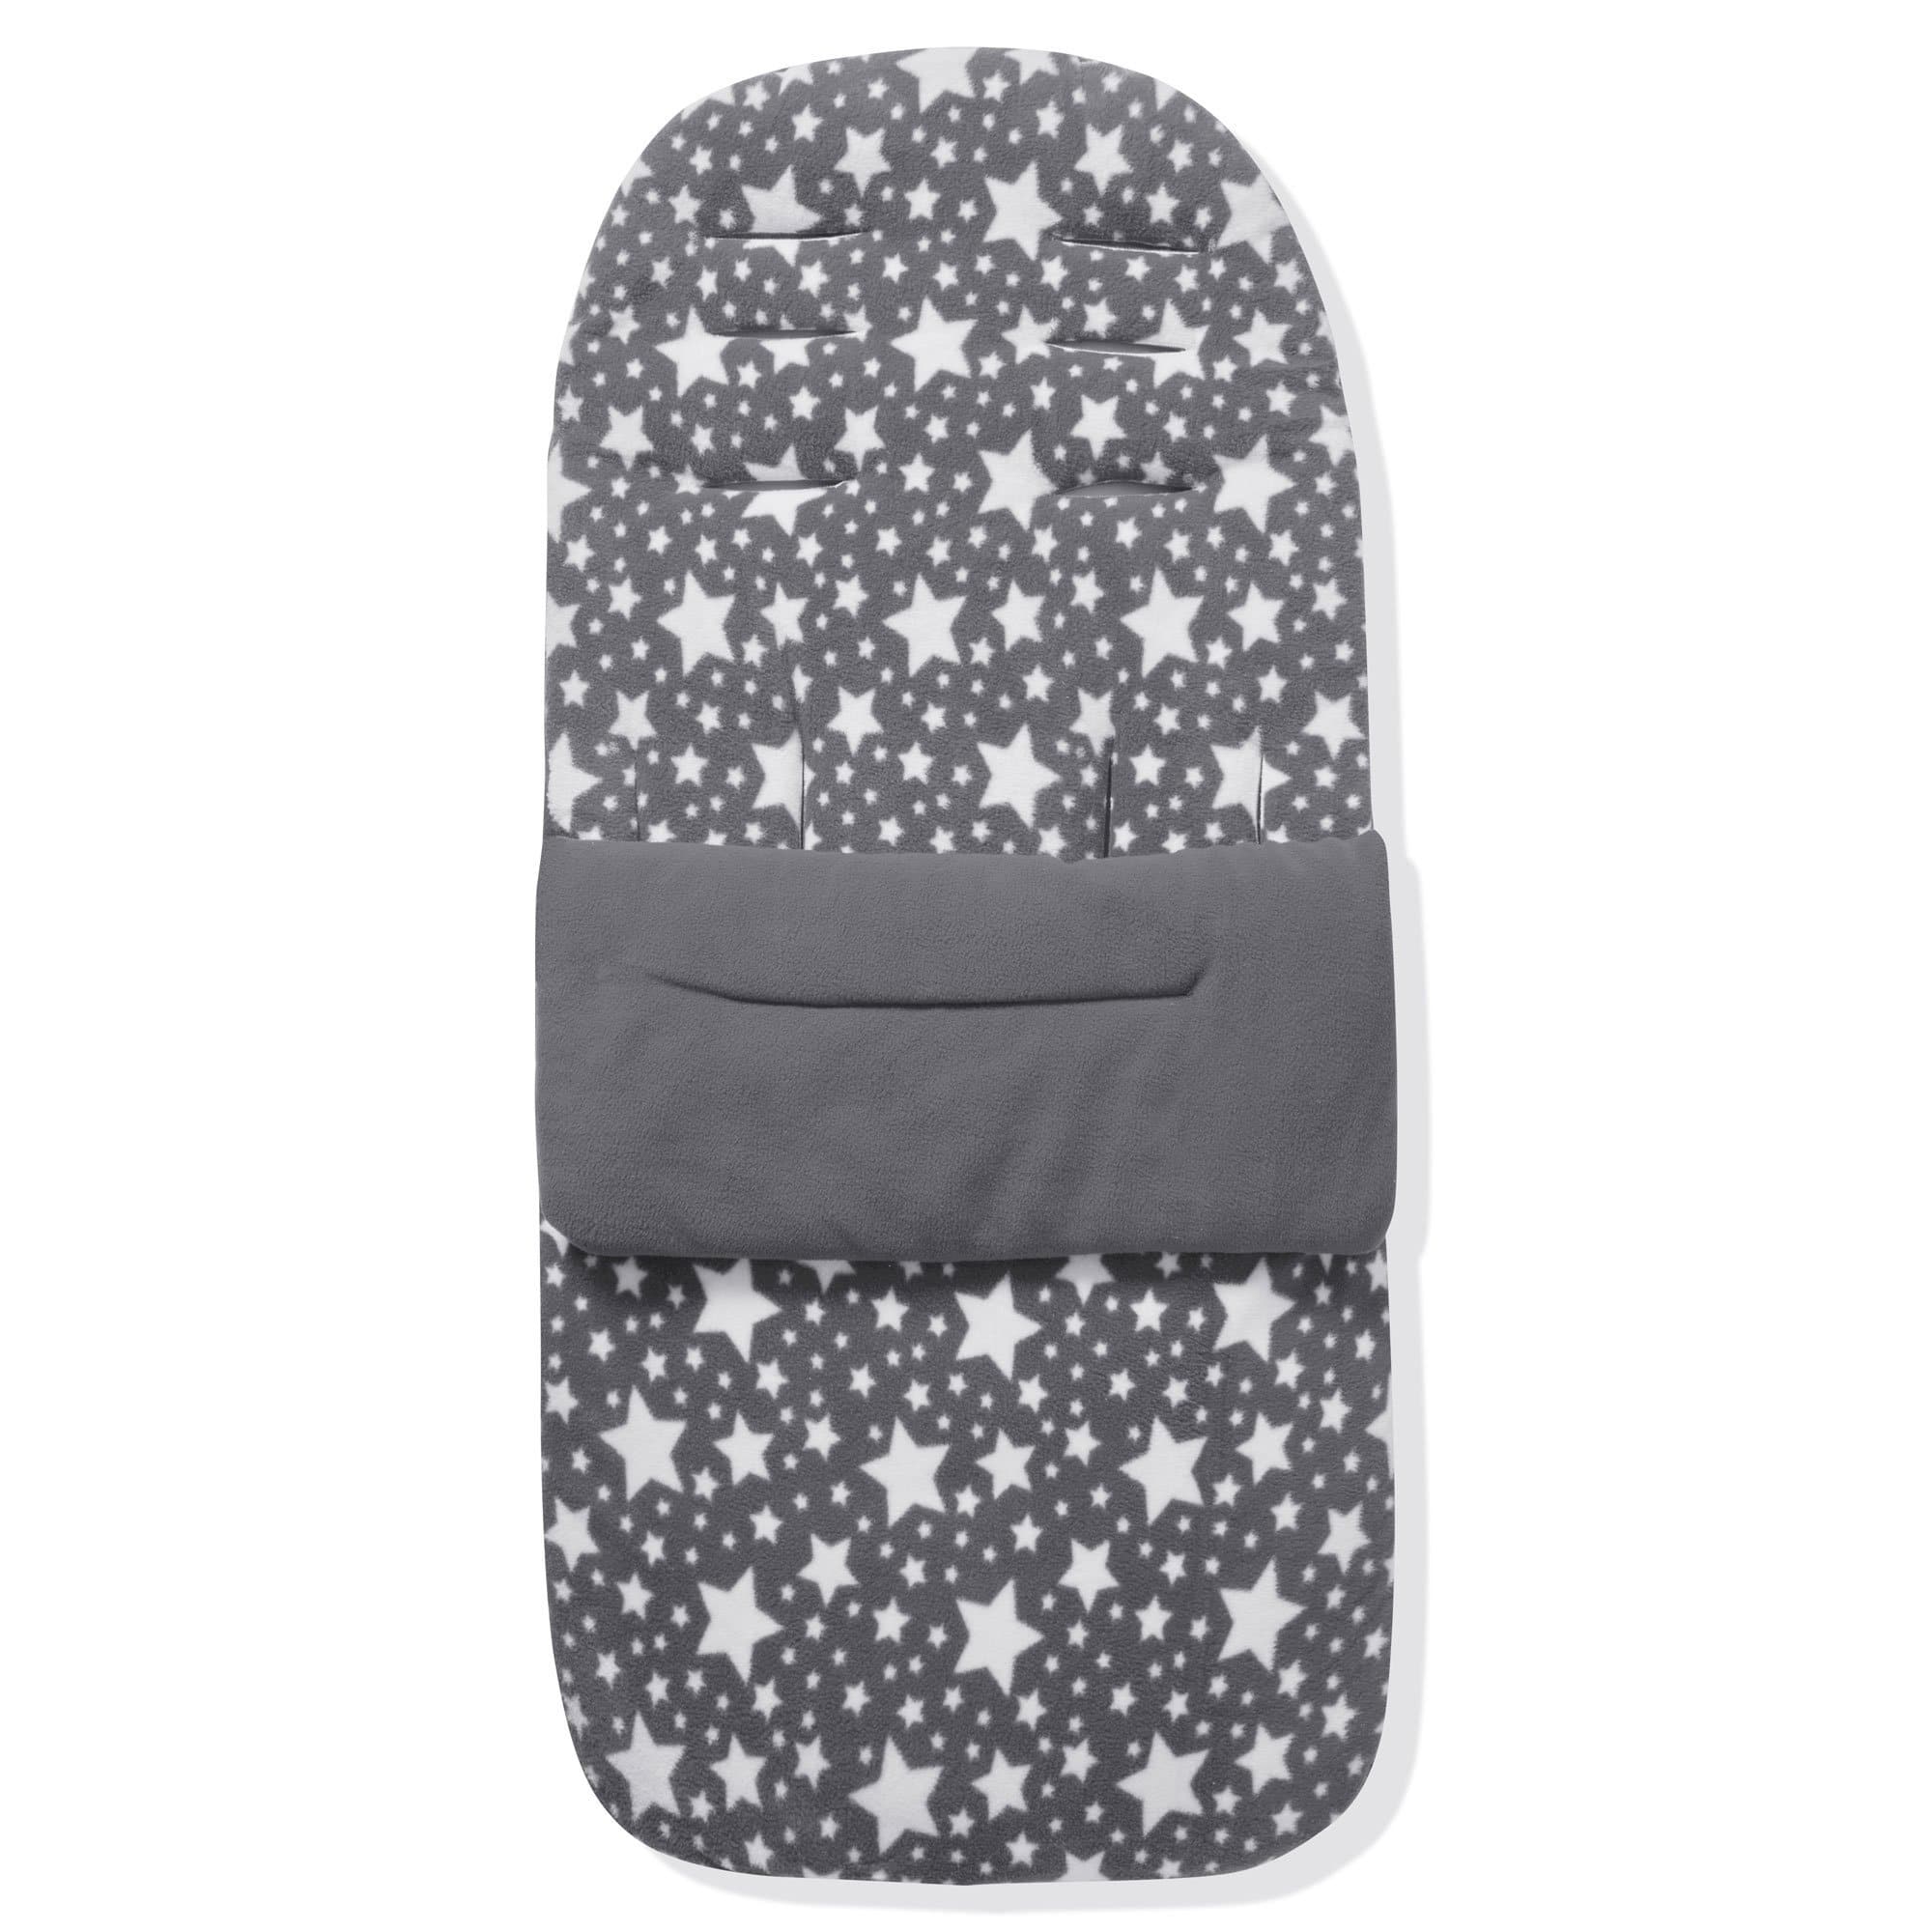 Fleece Footmuff / Cosy Toes Compatible with BOB - Grey Star / Fits All Models | For Your Little One